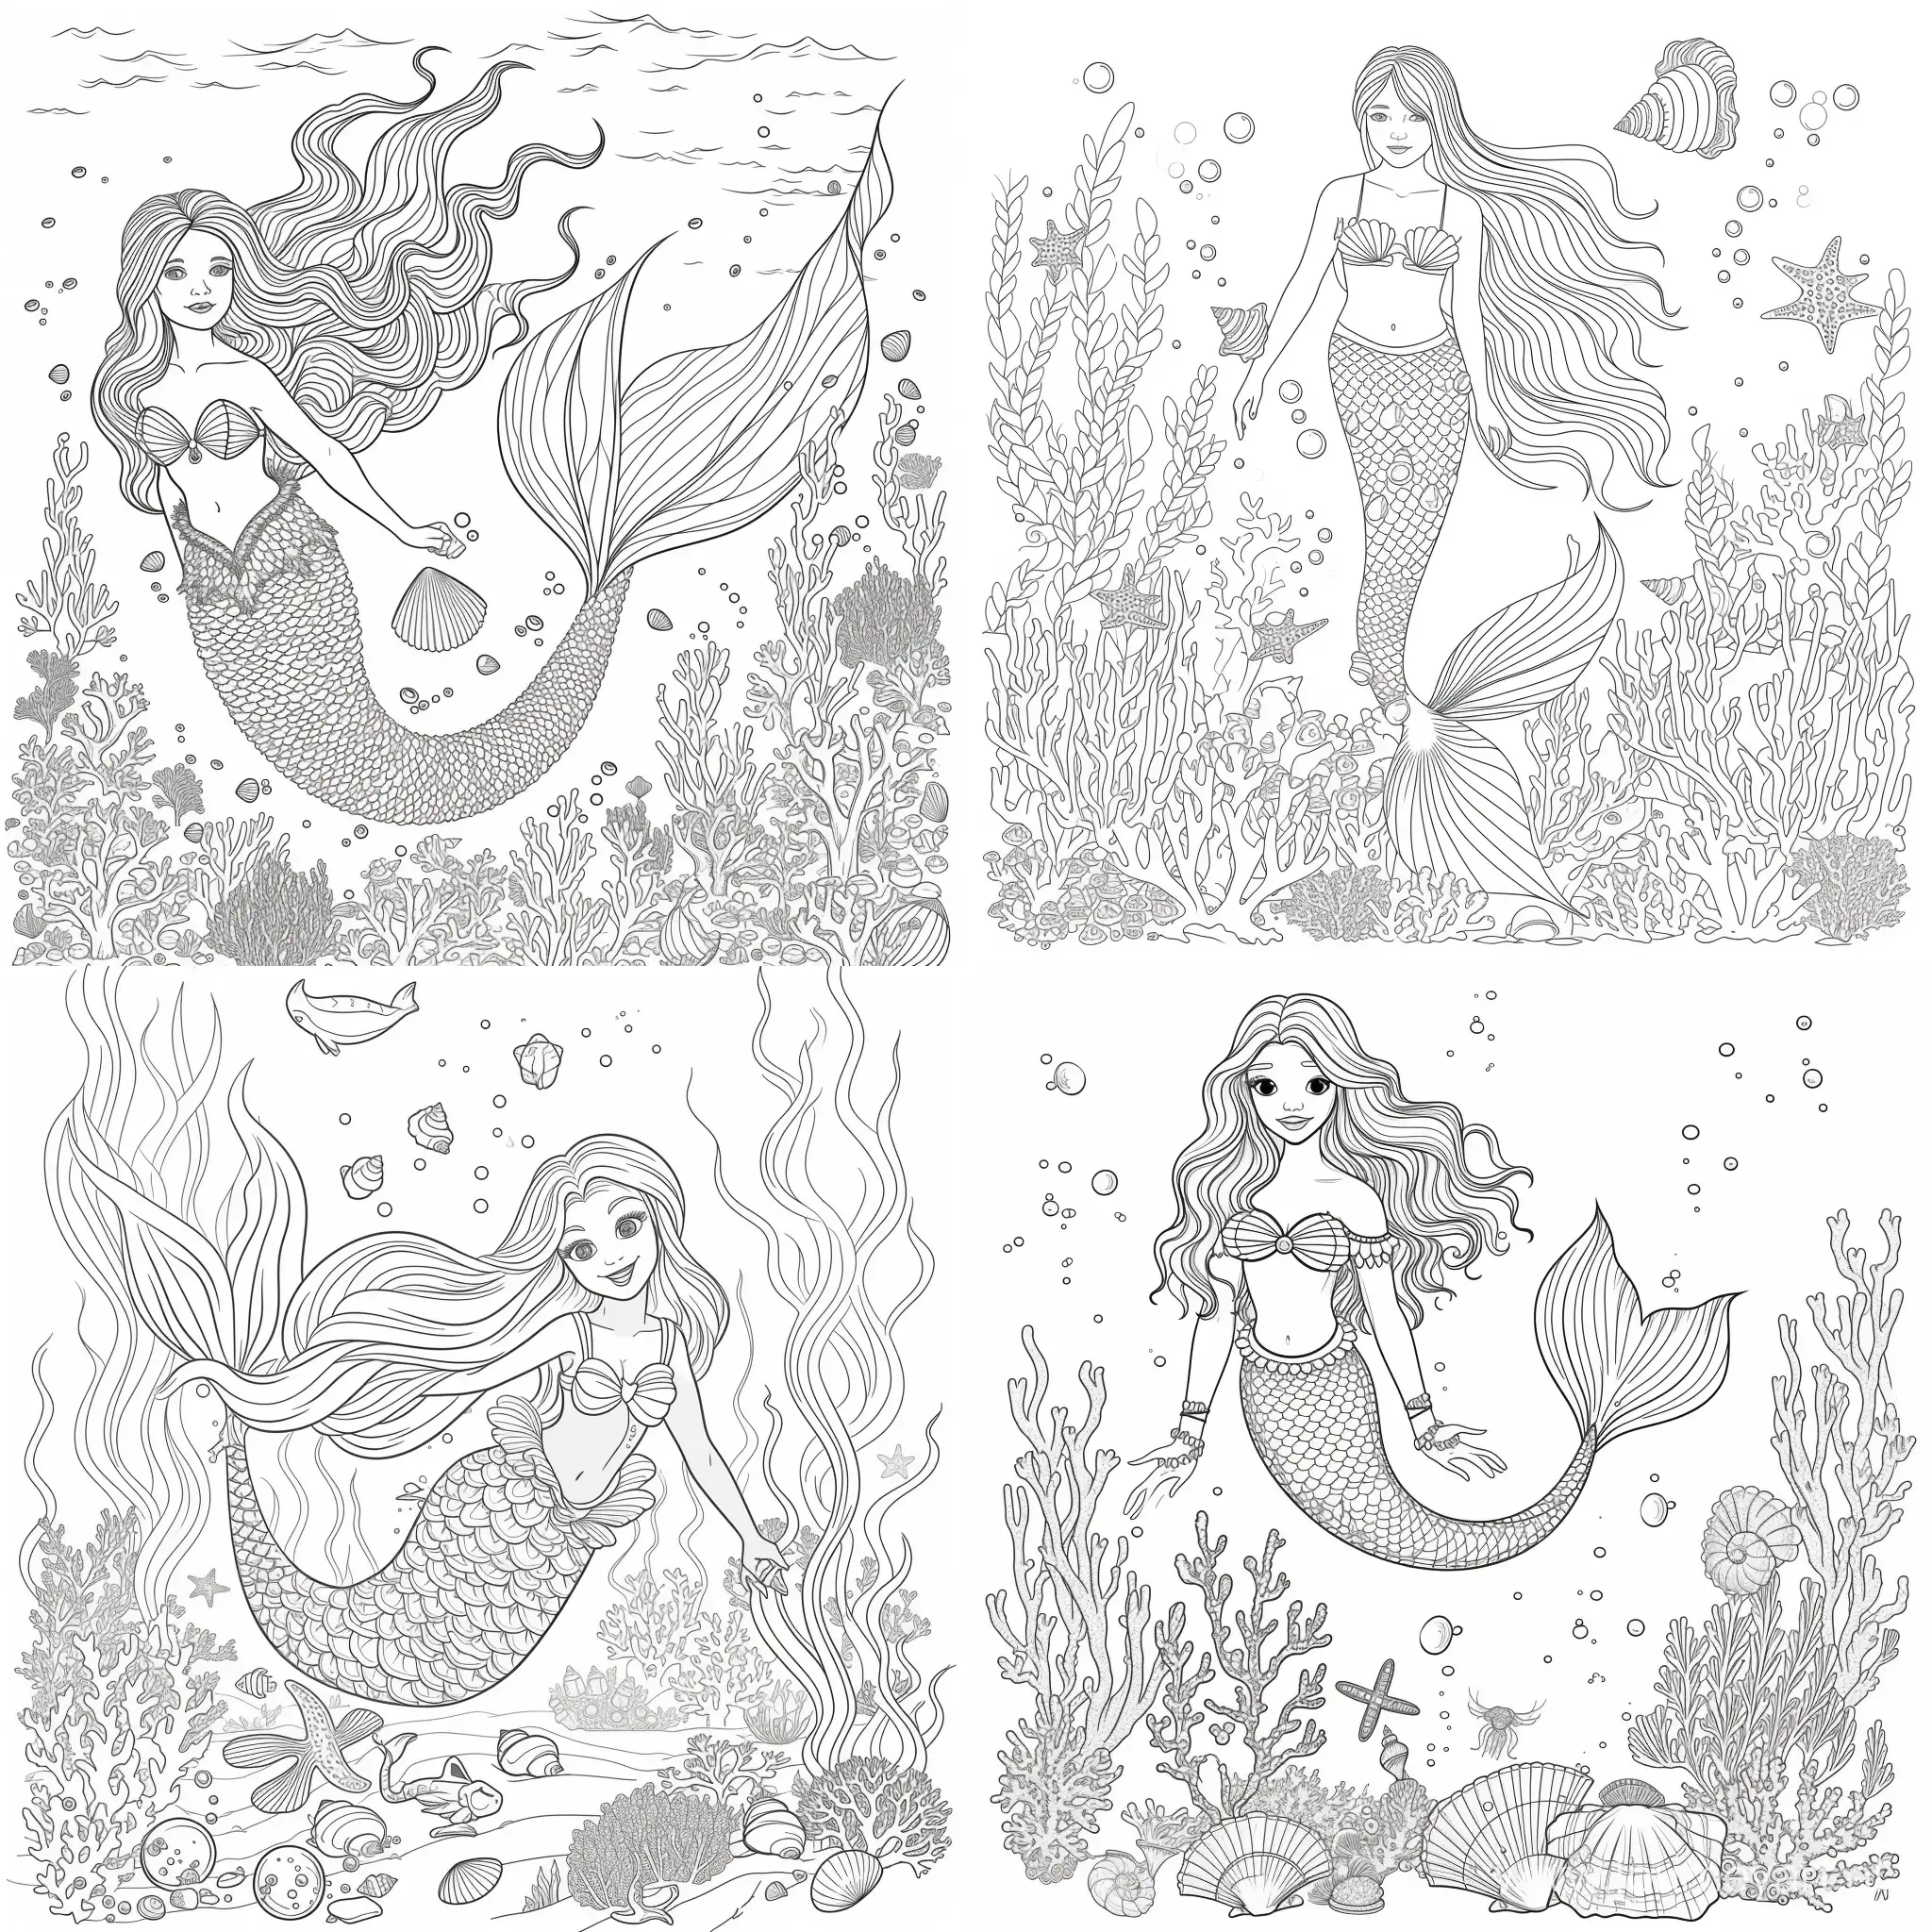 Marina-the-Mermaid-Explorer-Coloring-Book-Page-Underwater-Adventure-with-Sea-Creatures